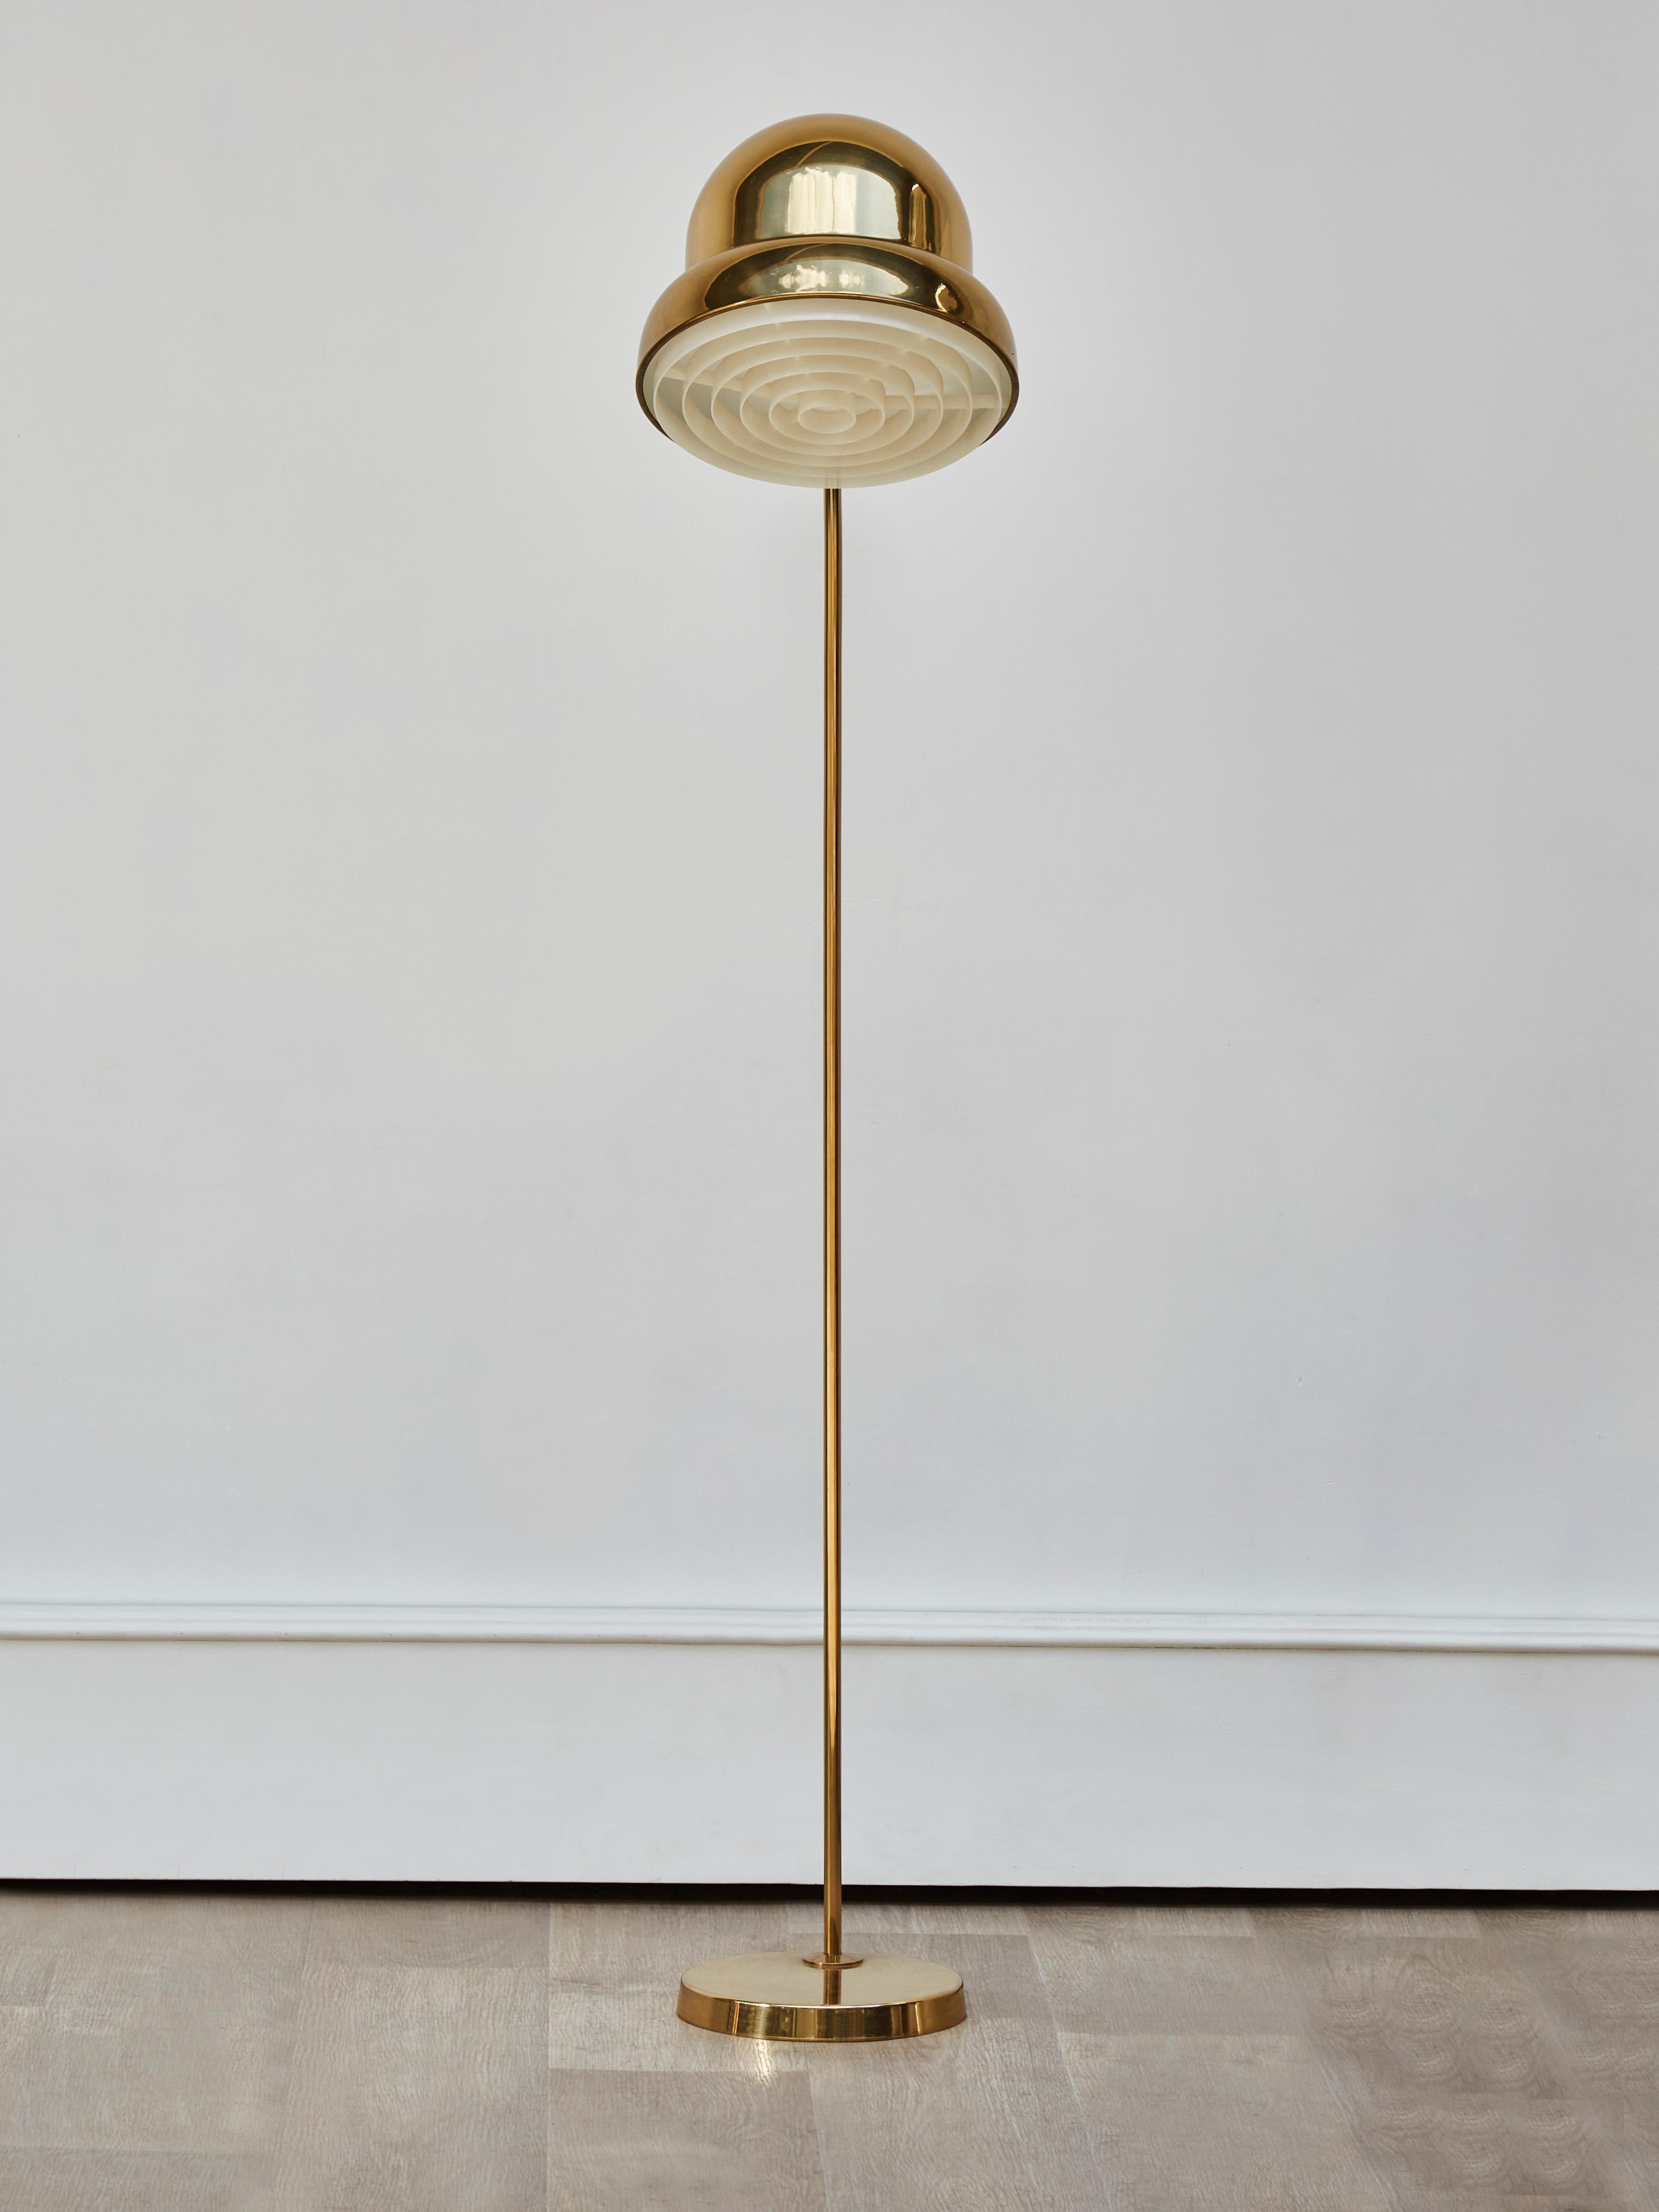 Beautiful vintage floor lamp in brass signed by Bergboms
Sweden, 1960s.